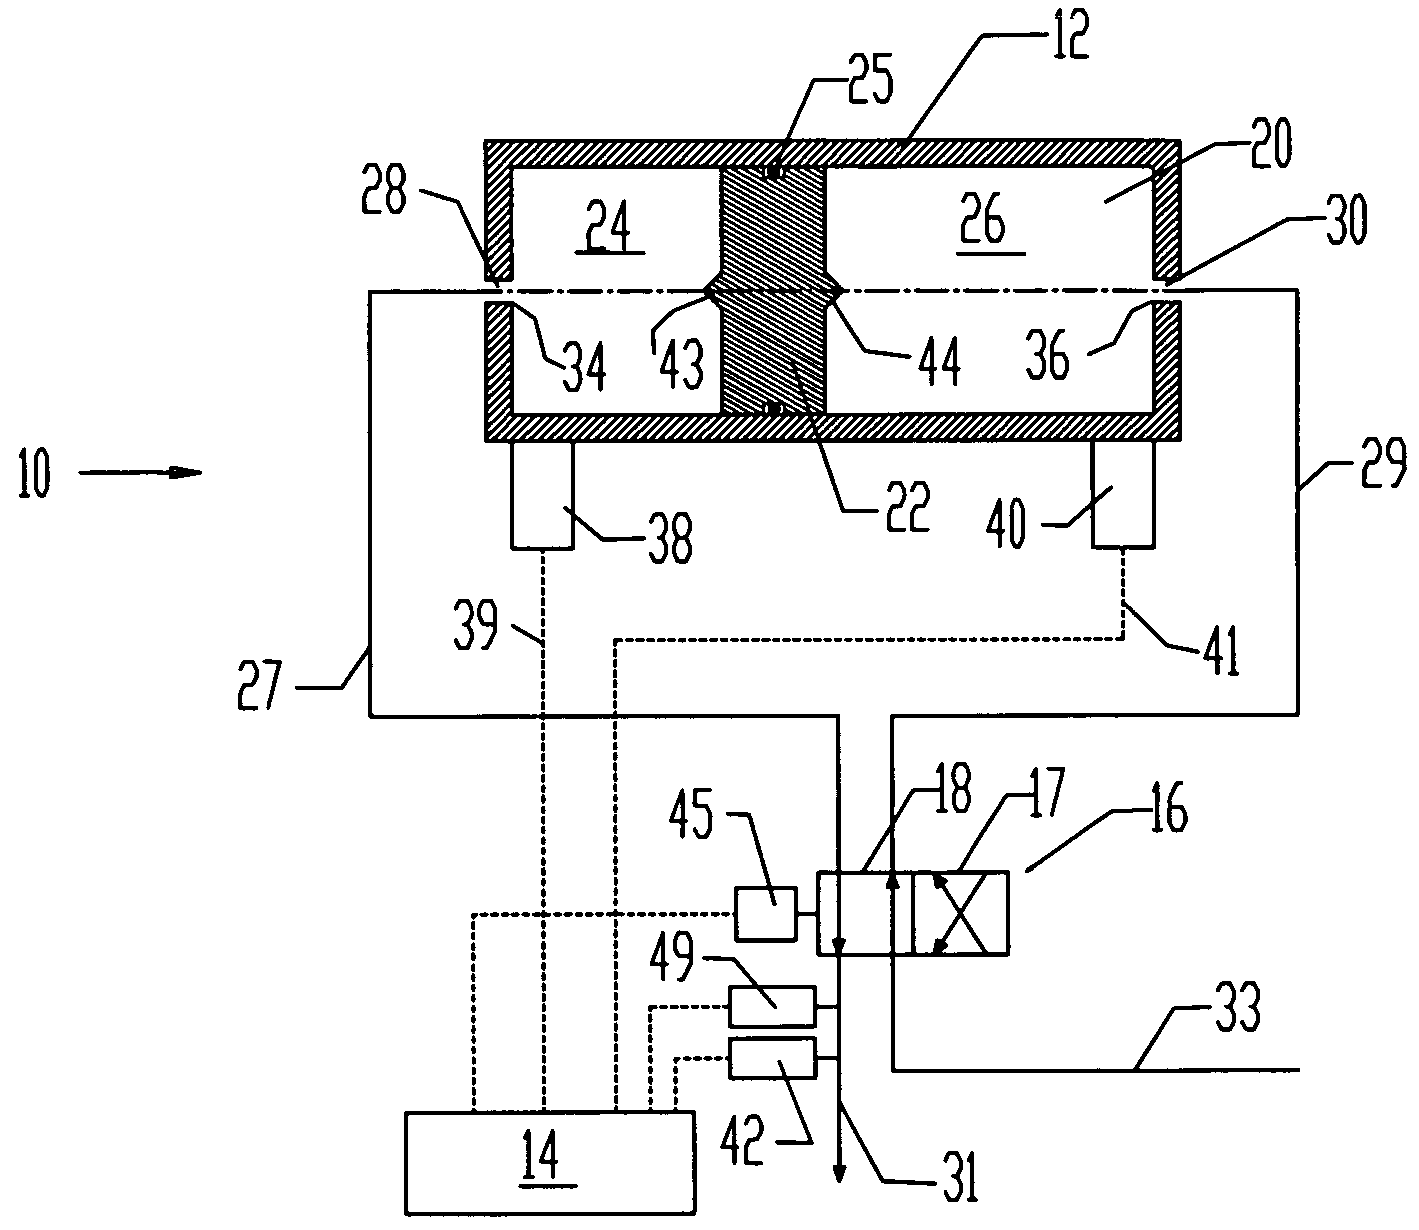 Fluid injection system